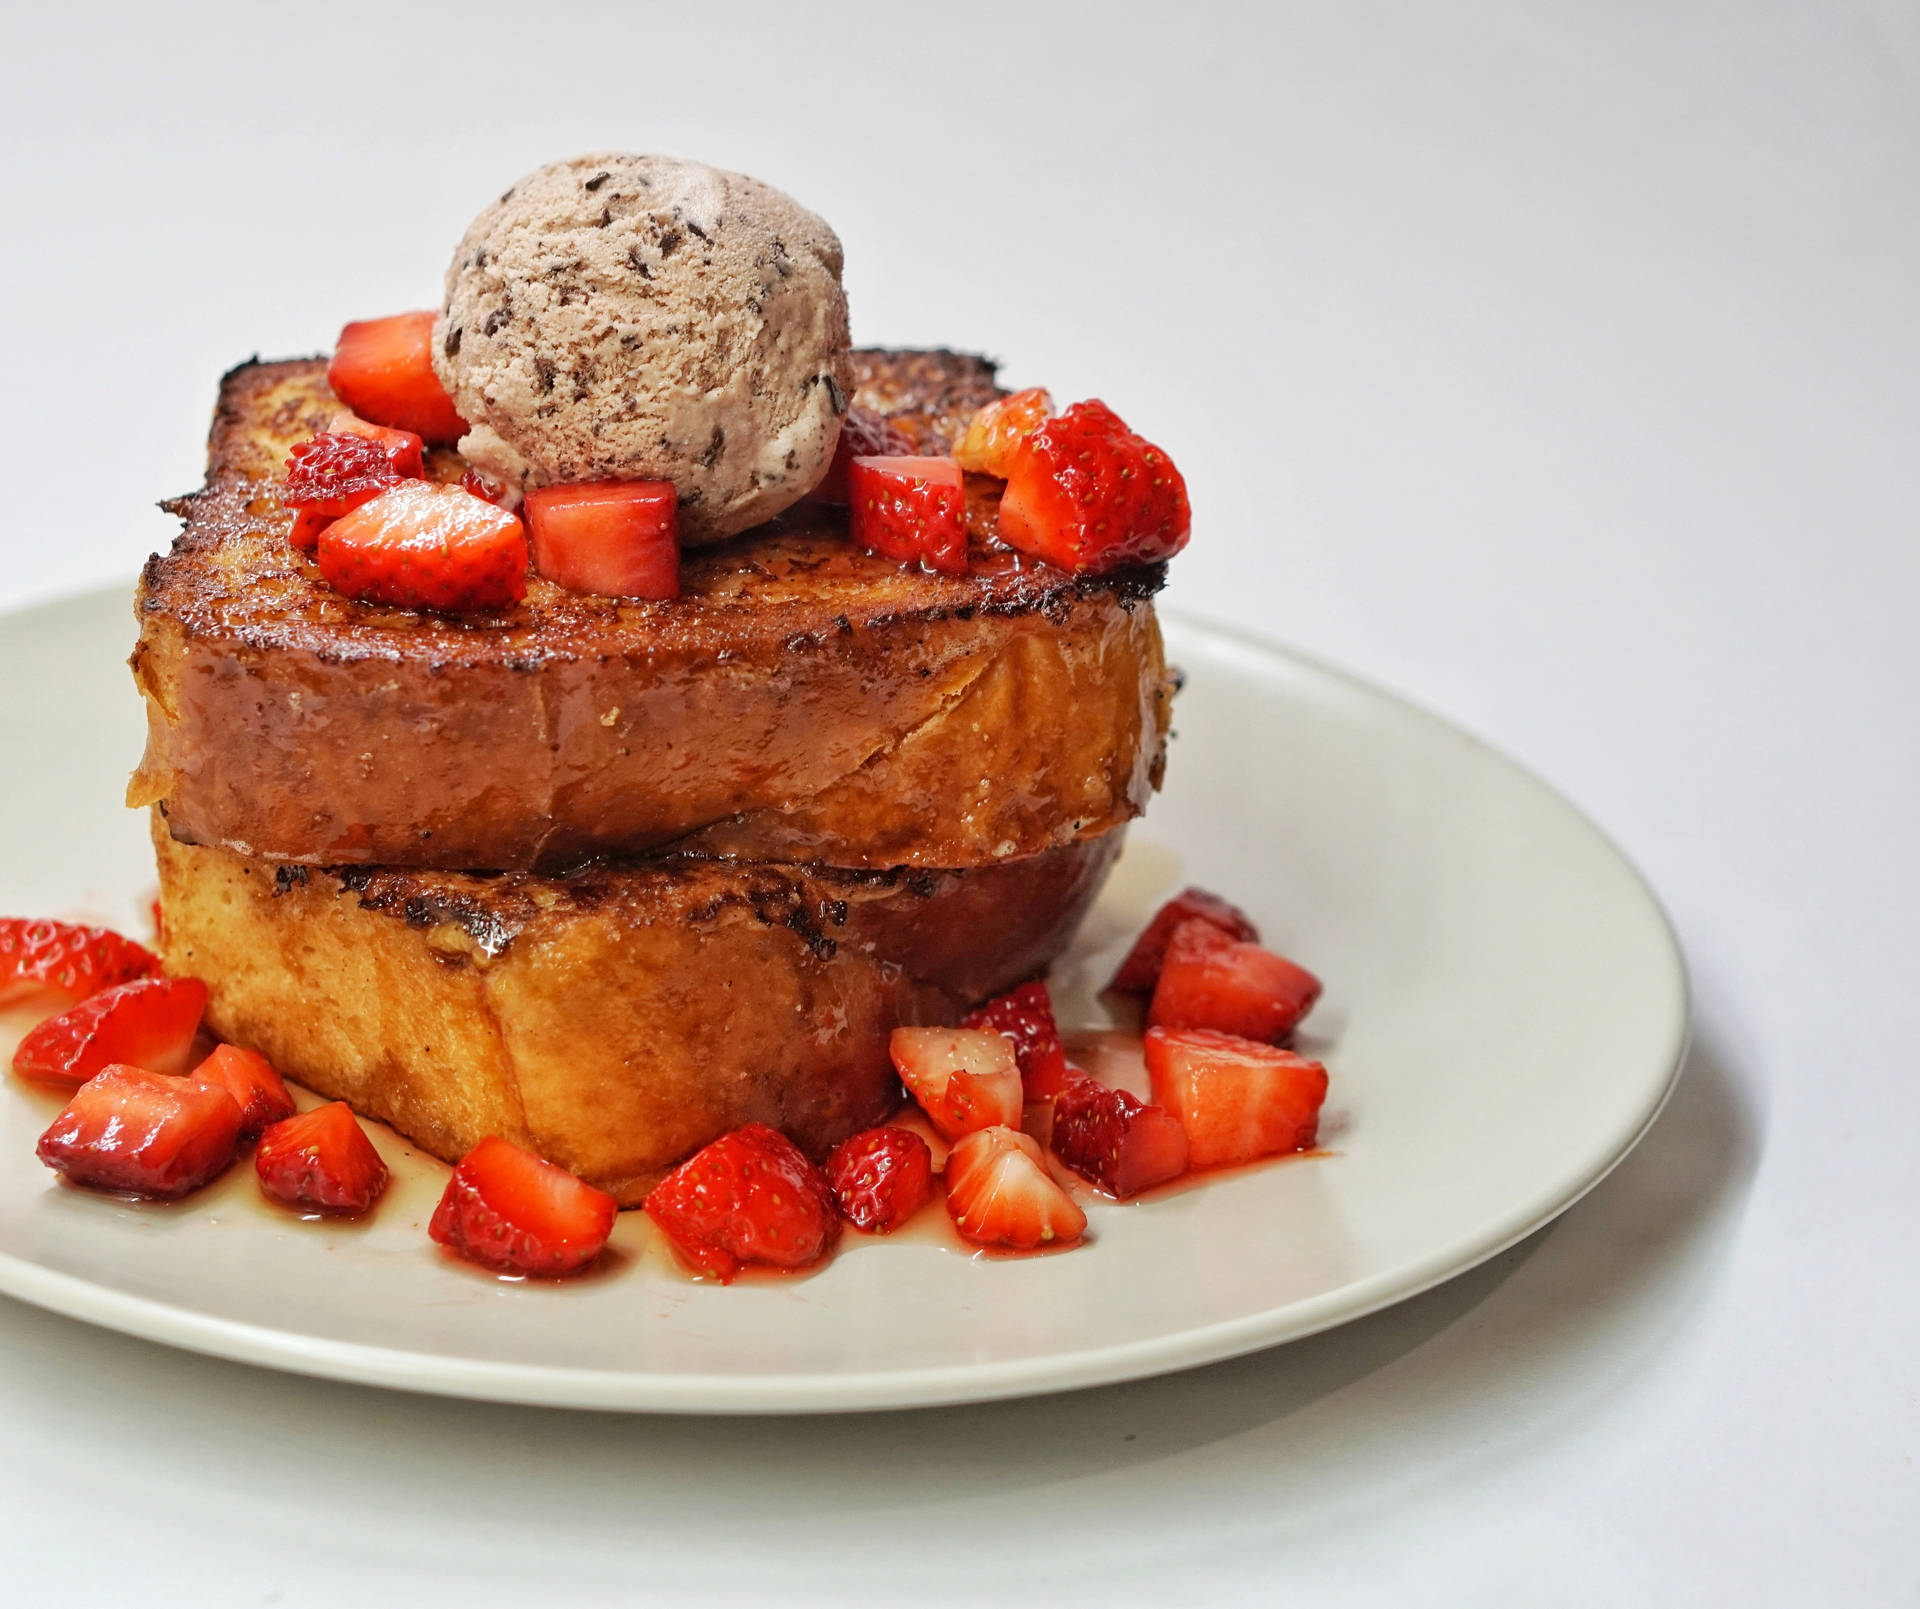 Gourmet Homemade French Toast With Berries And Powdered Sugar Wallpaper